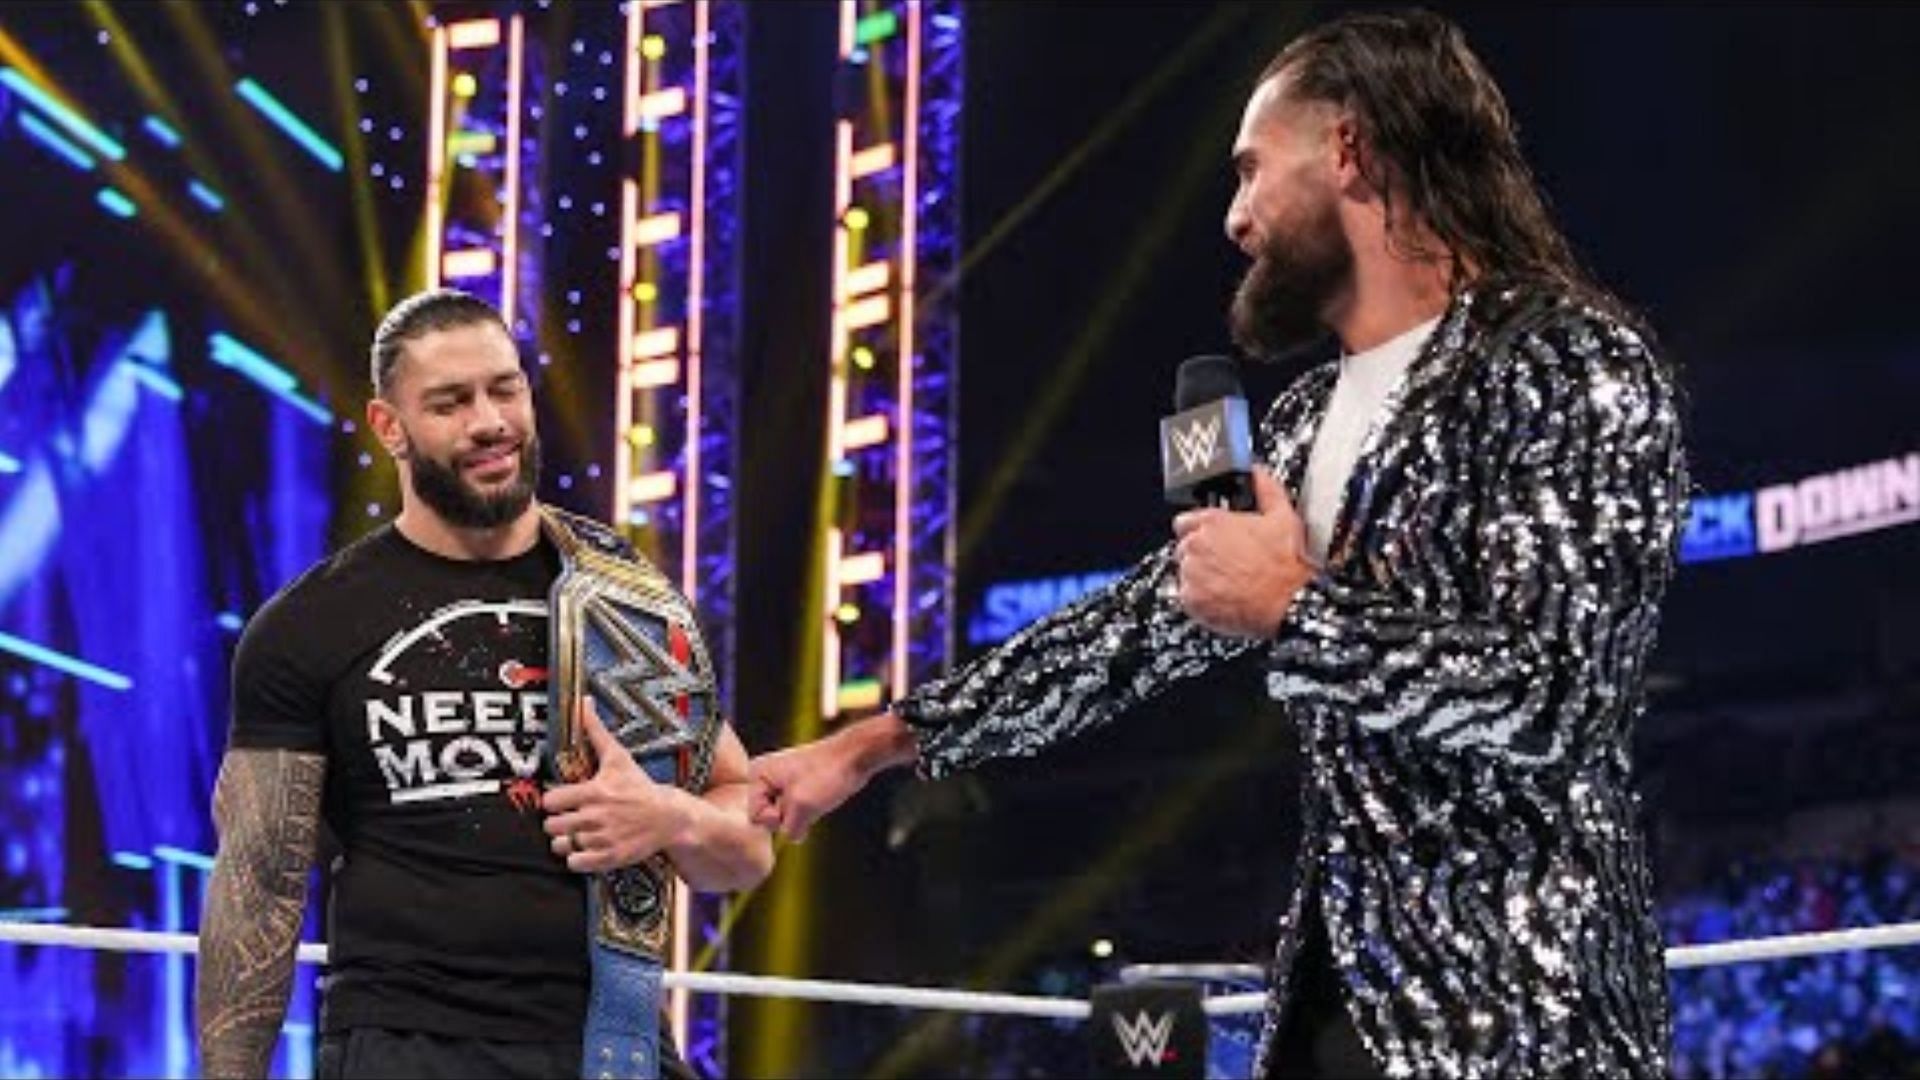 Seth Rollins and Roman Reigns started on the main roster together.